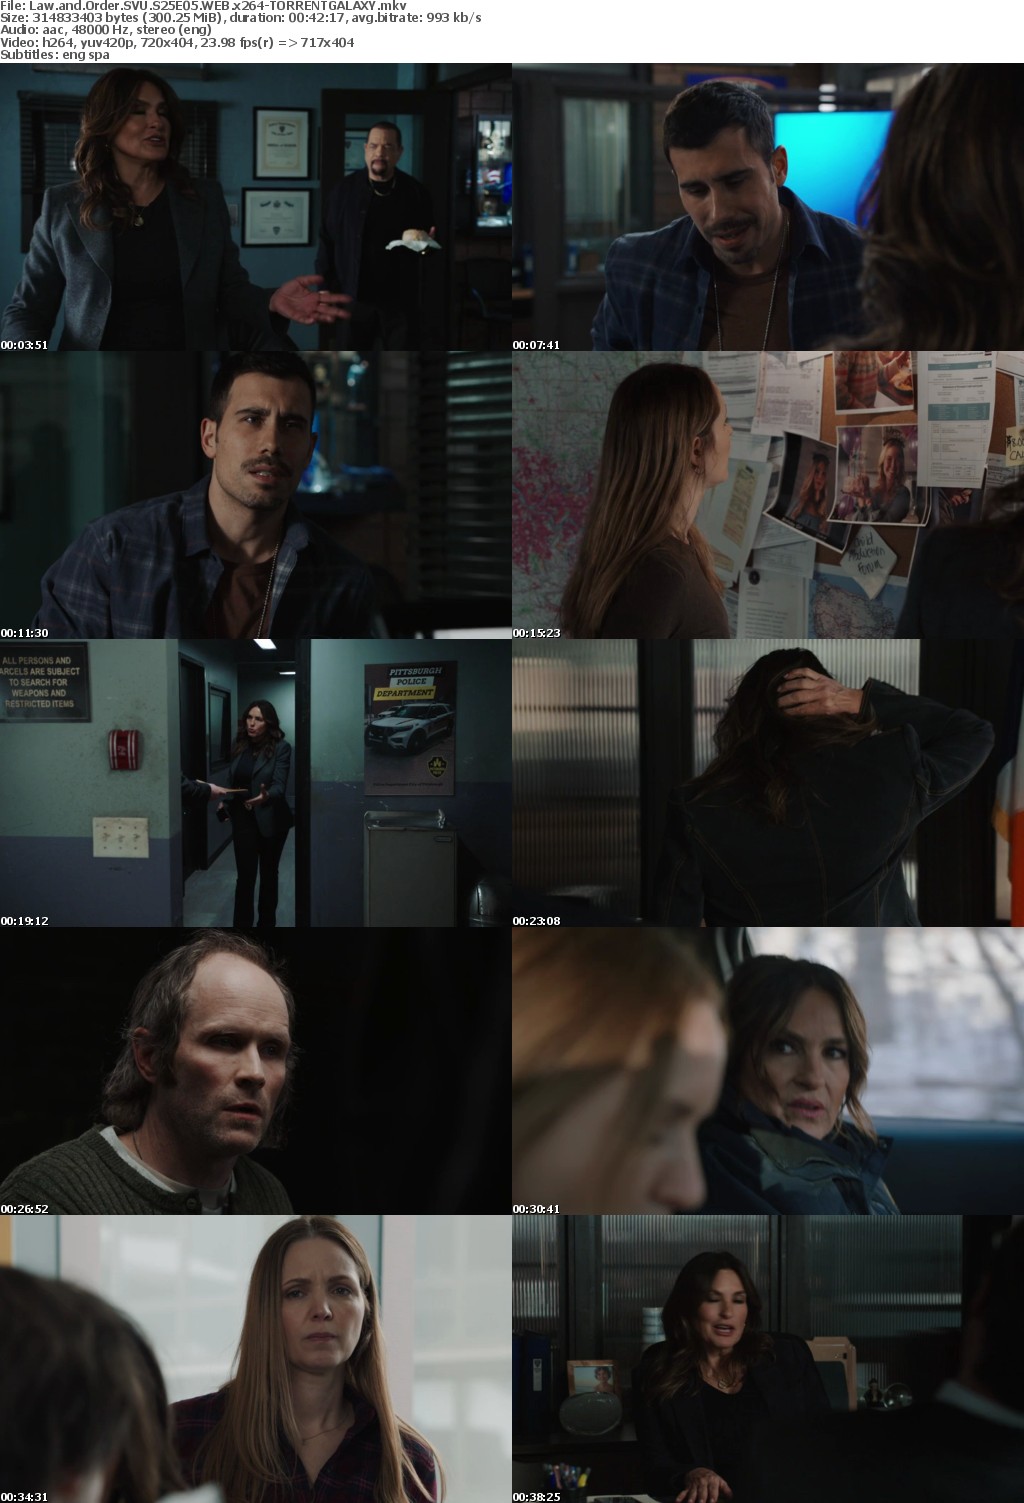 Law and Order SVU S25E05 WEB x264-GALAXY